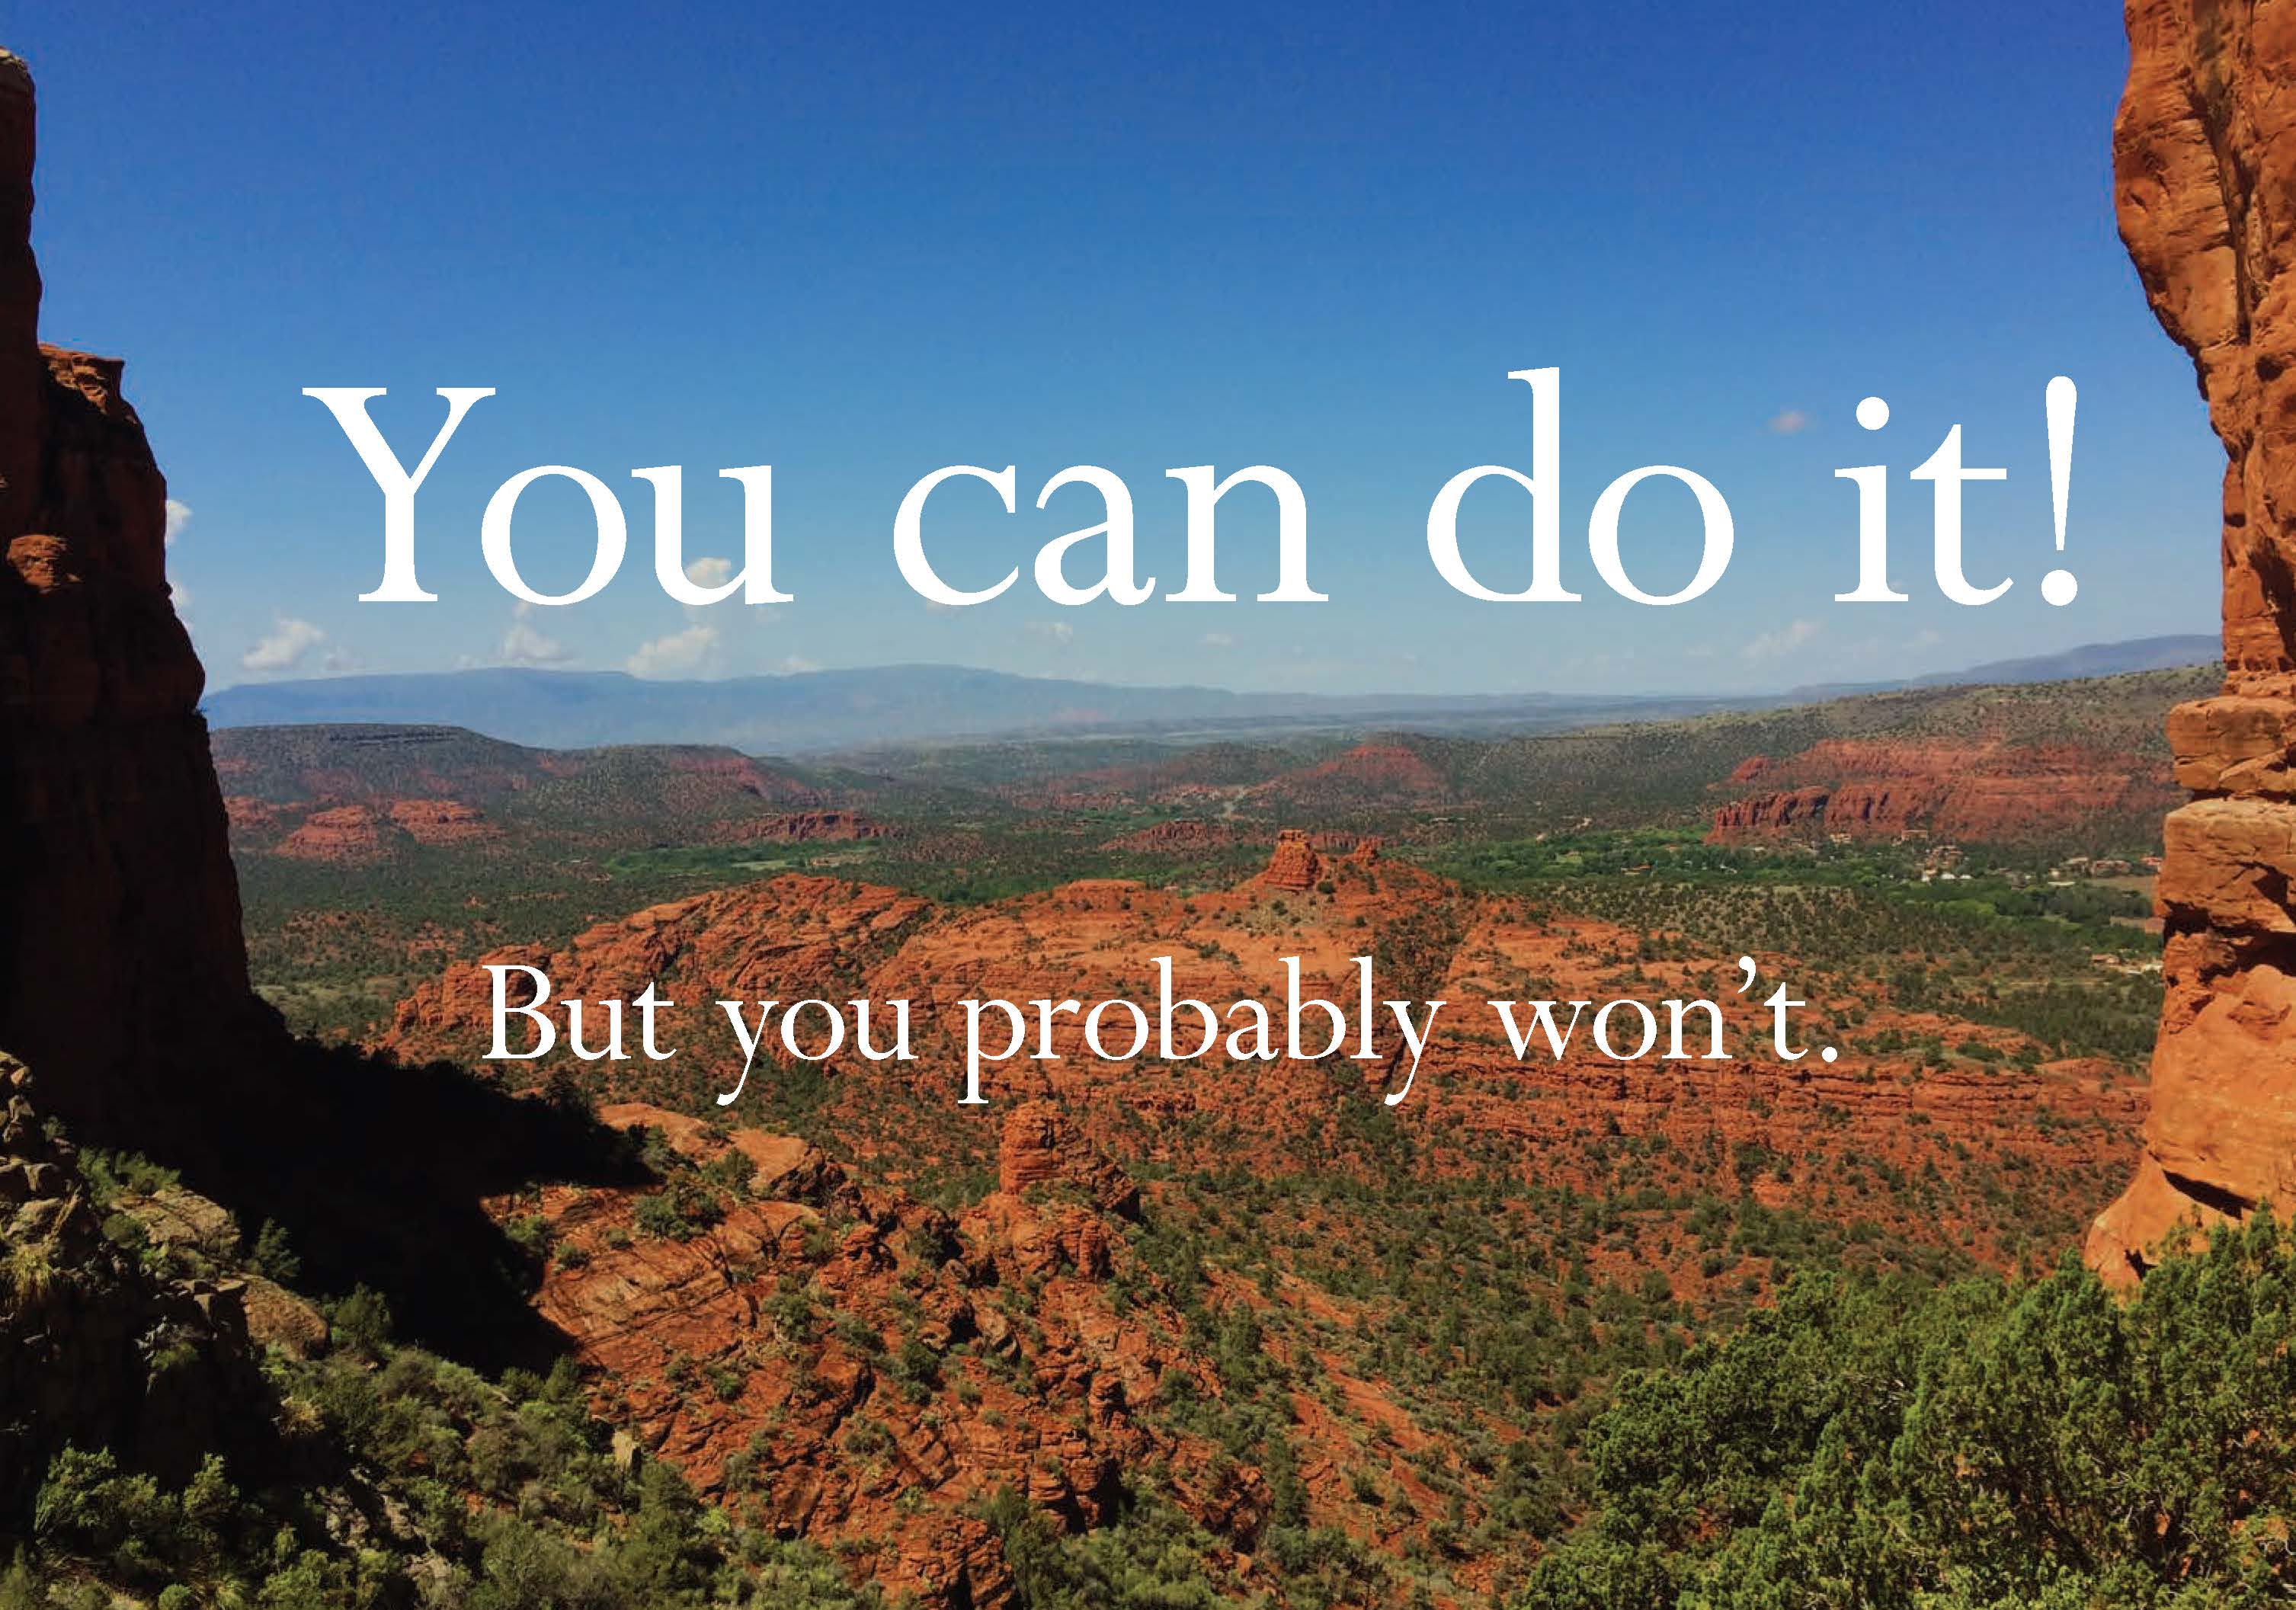 A photo of a rocky mountain range with the affirmation: 'You can do it! But you probably won't.'